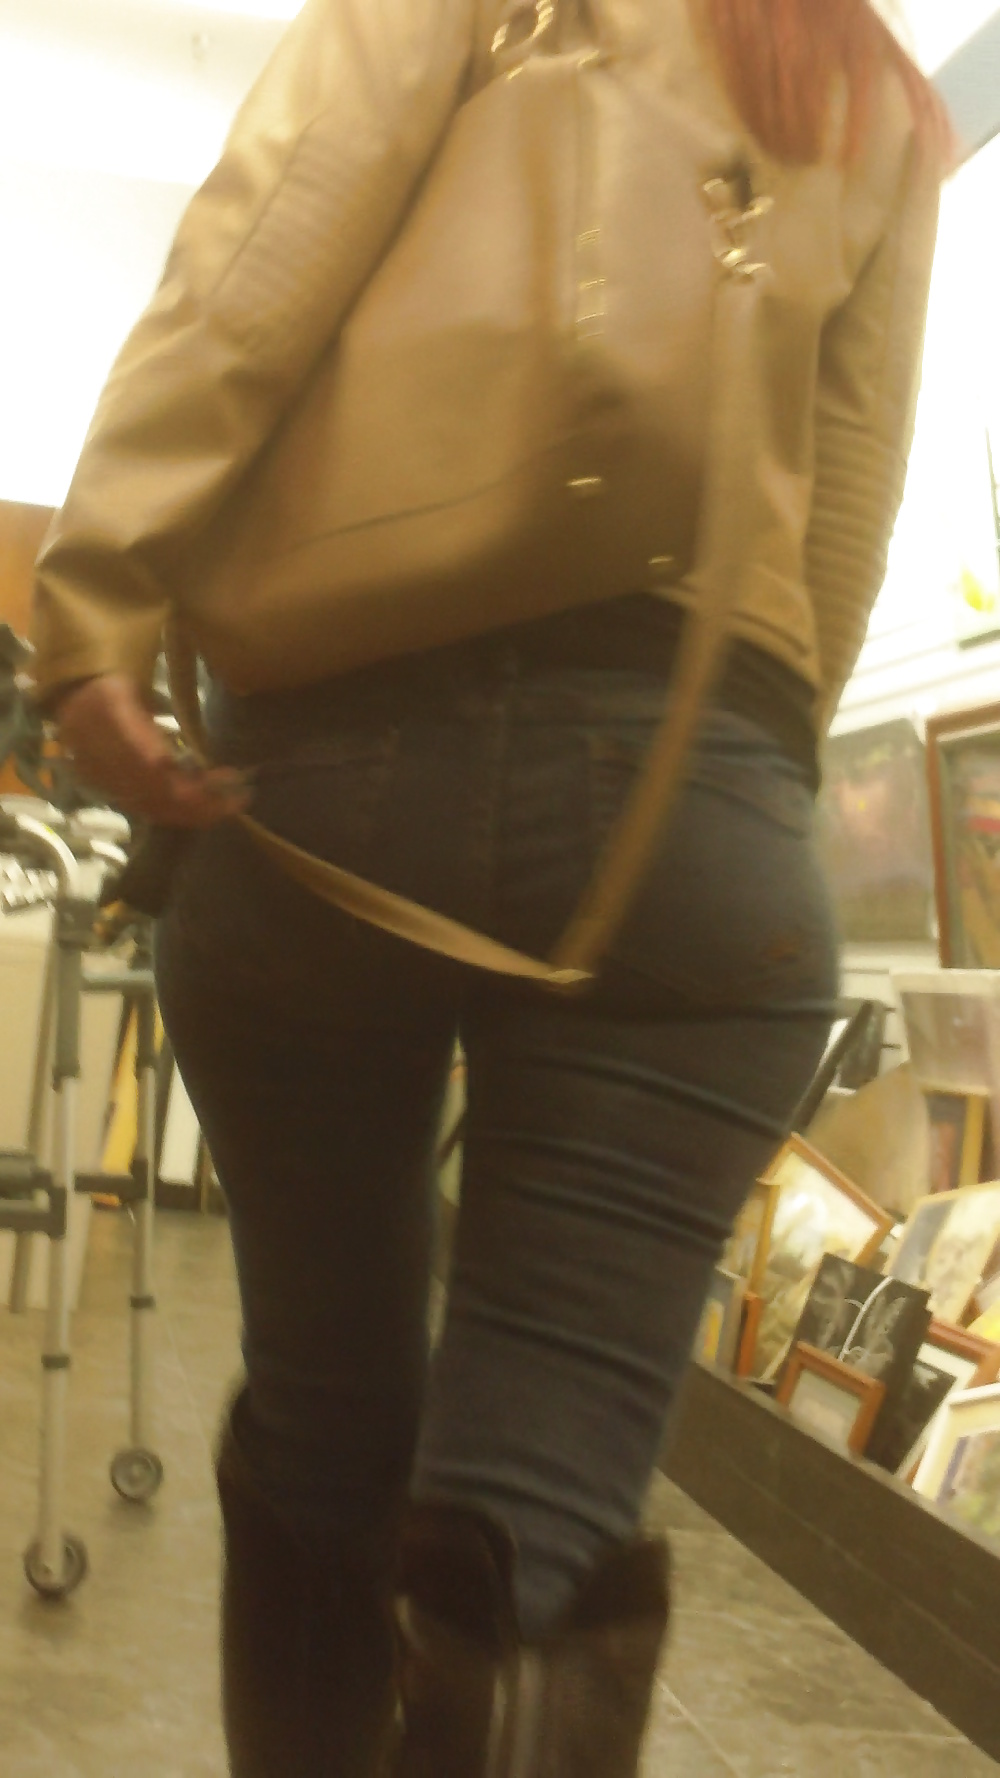 Young teen butts & ass at the store #21240472